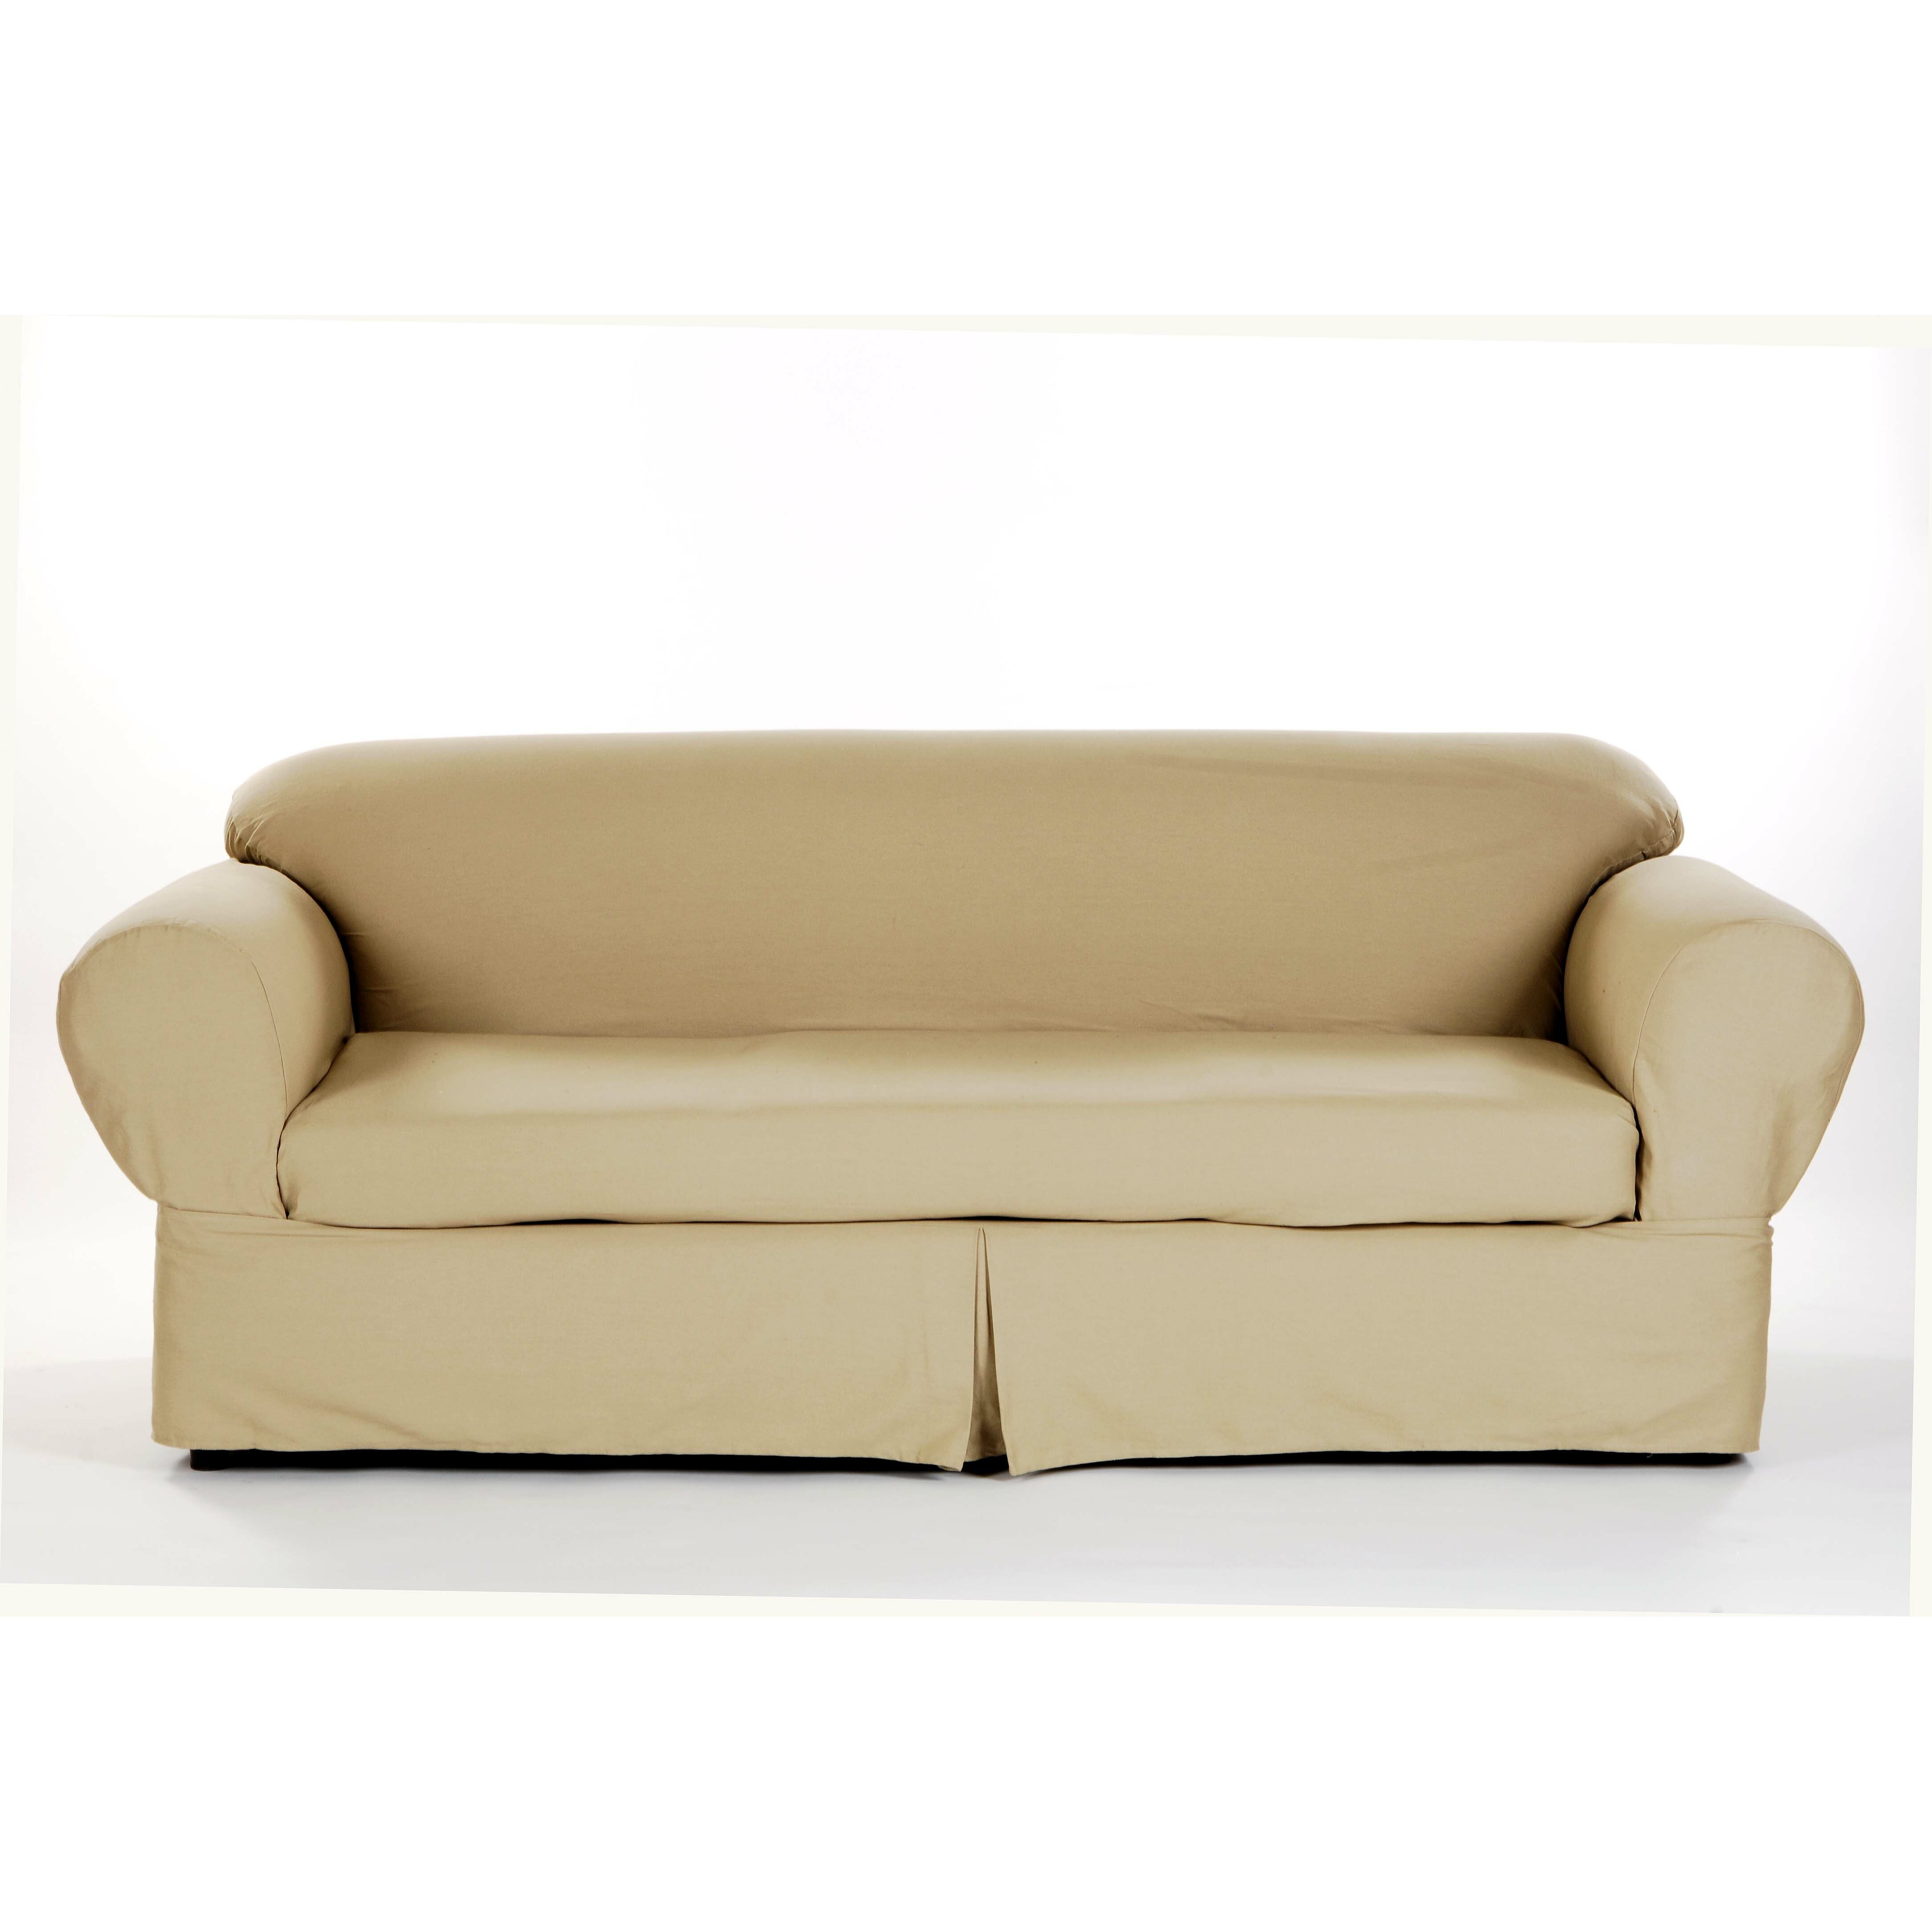 Darby Home Co Brushed Twill Sofa Slipcover & Reviews Wayfair